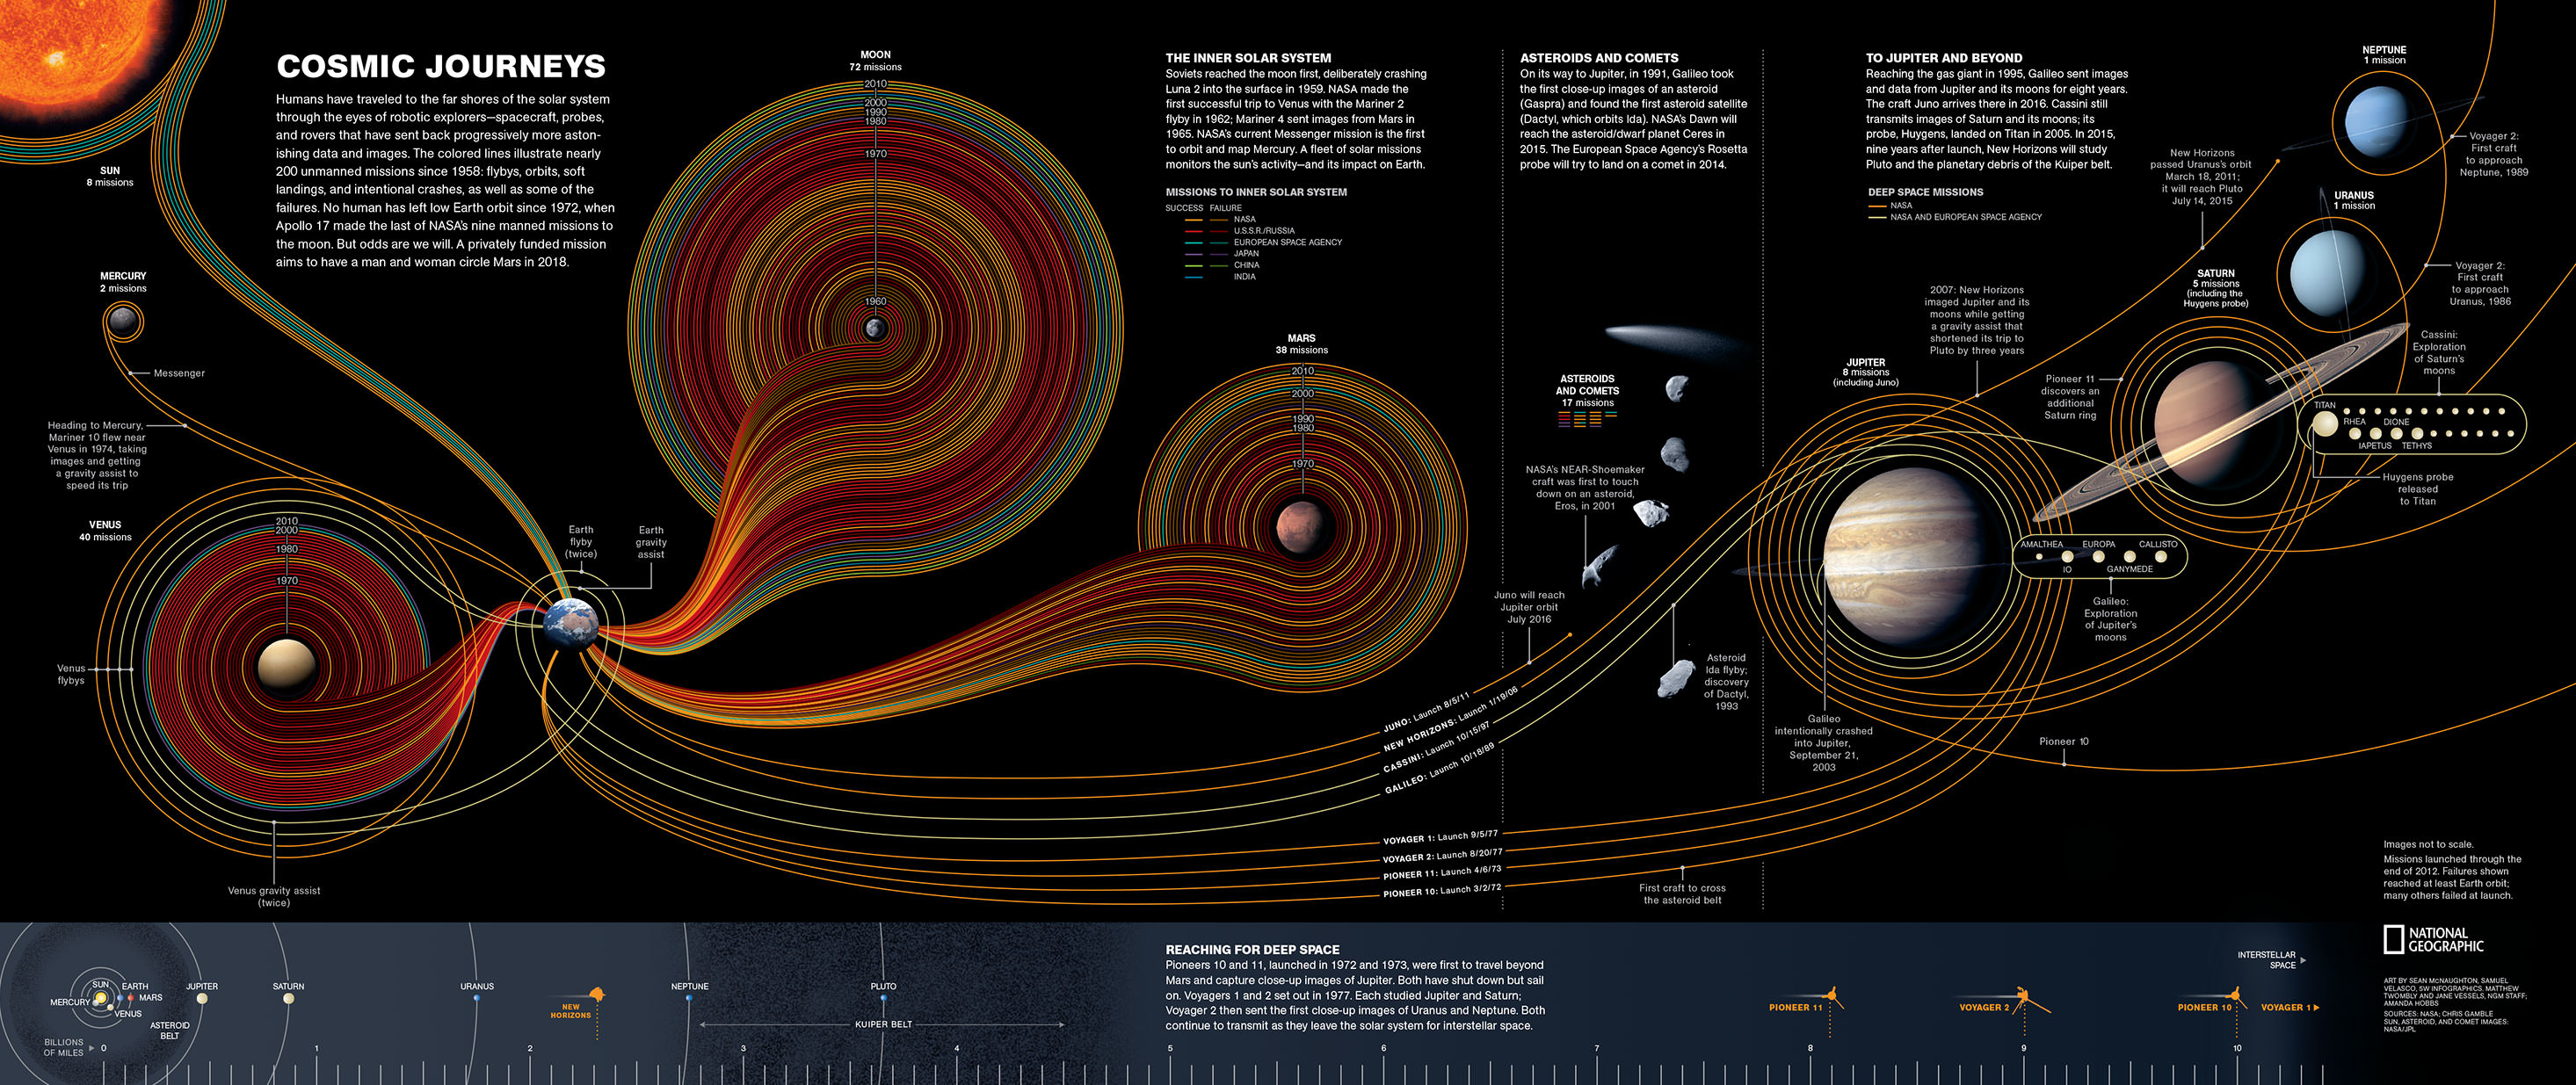 The Chart Of Cosmic Exploration